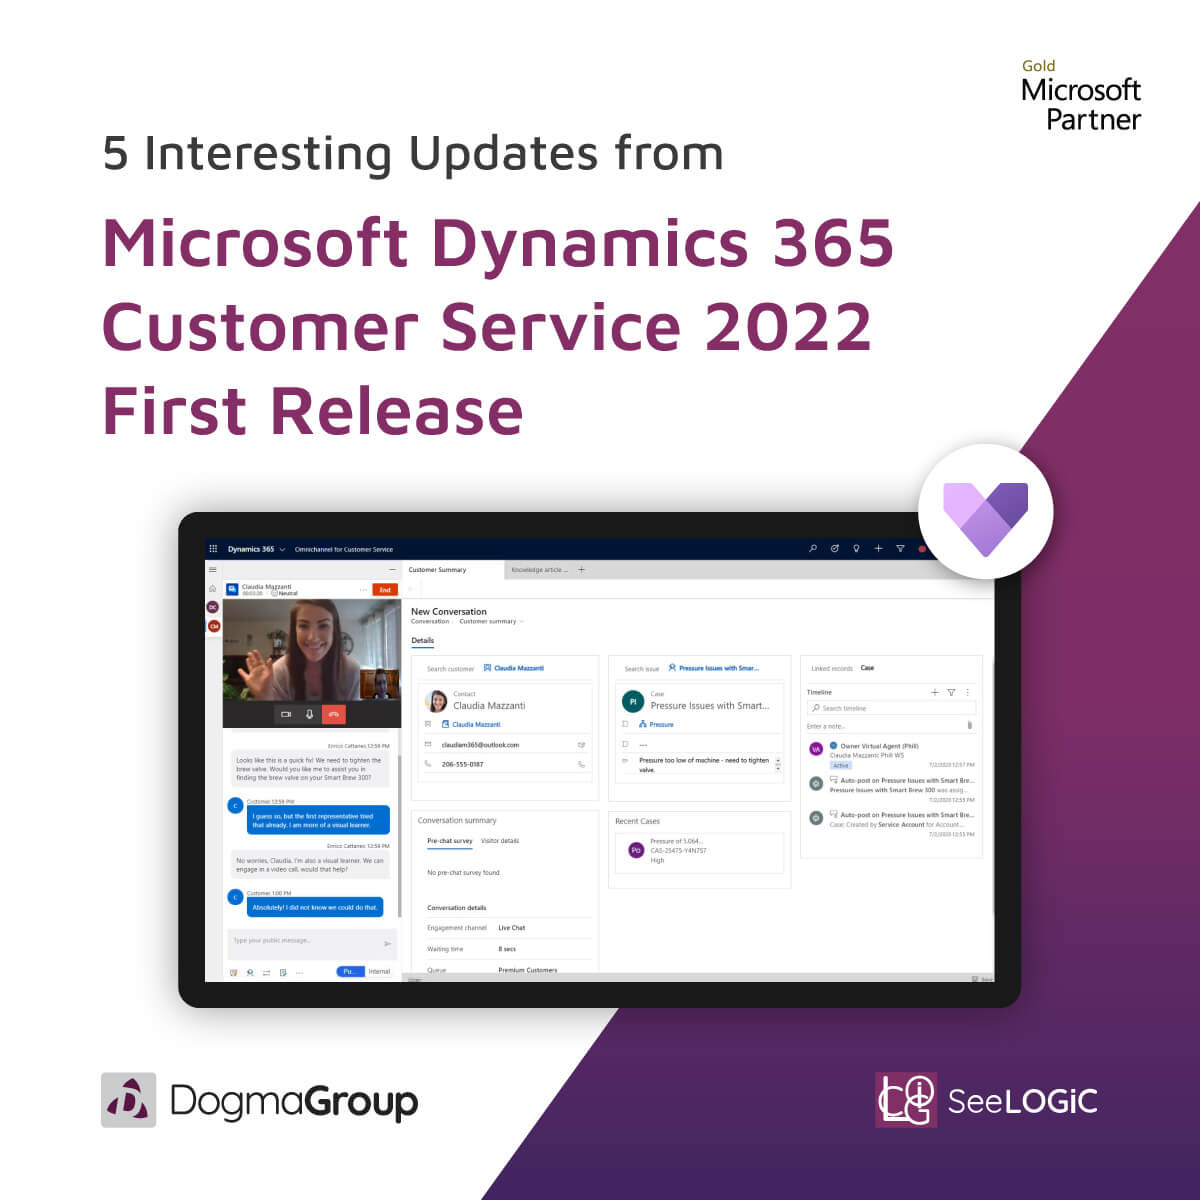 5 Quick and Interesting Updates from Microsoft Dynamics 365 Customer Service 2022 First Release